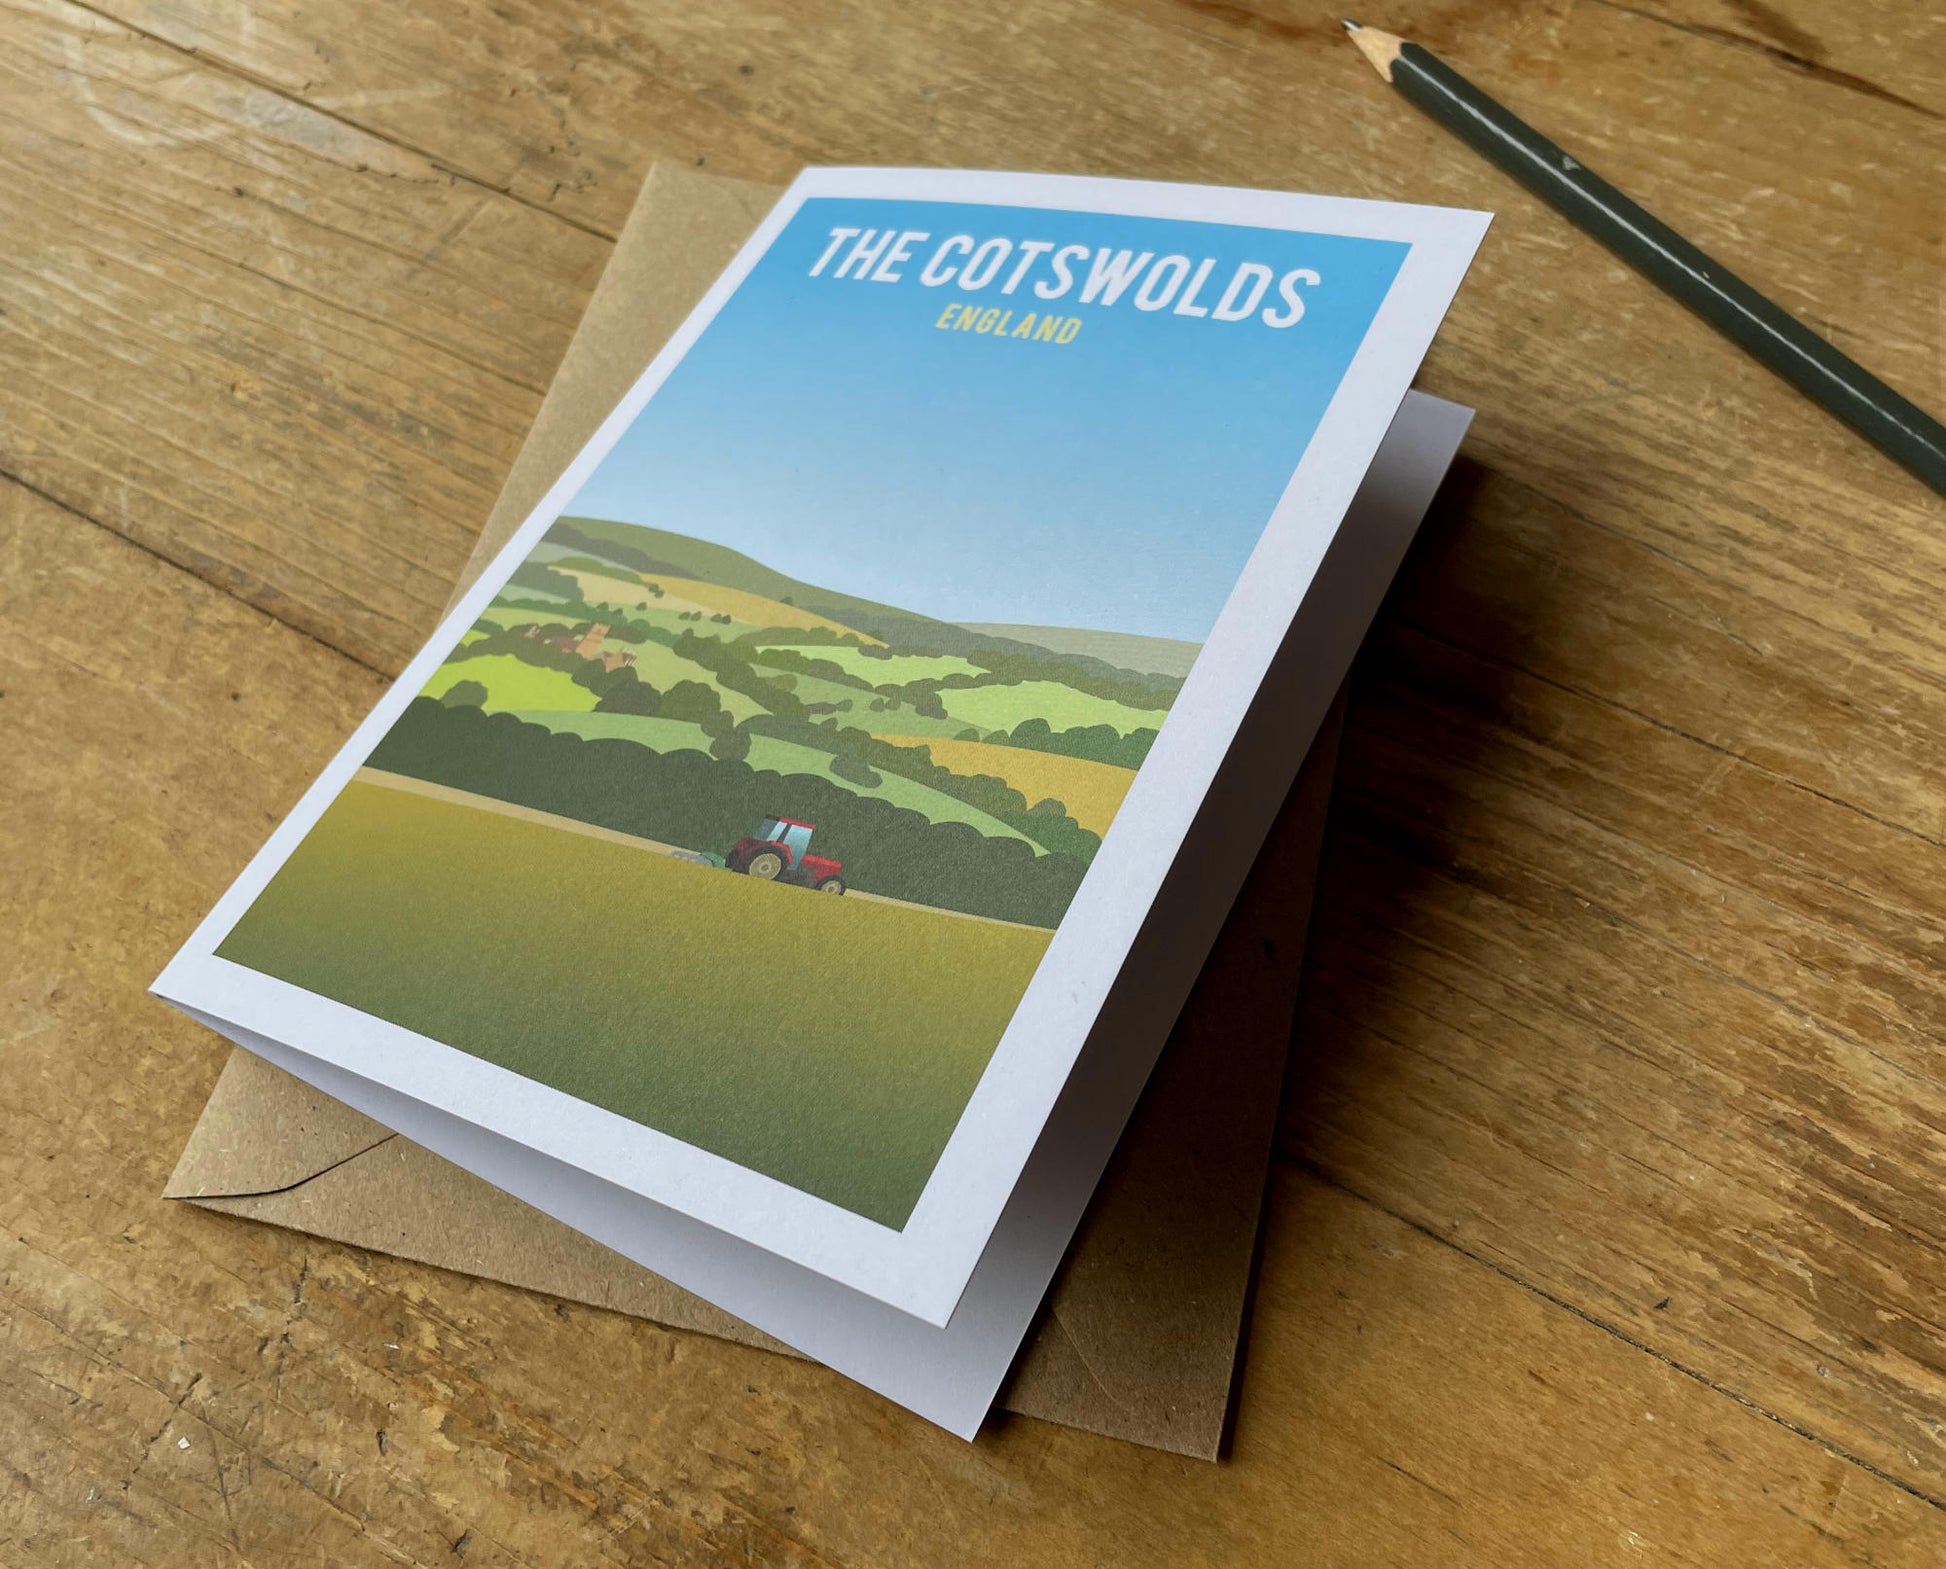 Cotswold Hills Tractor Greeting Card on desk